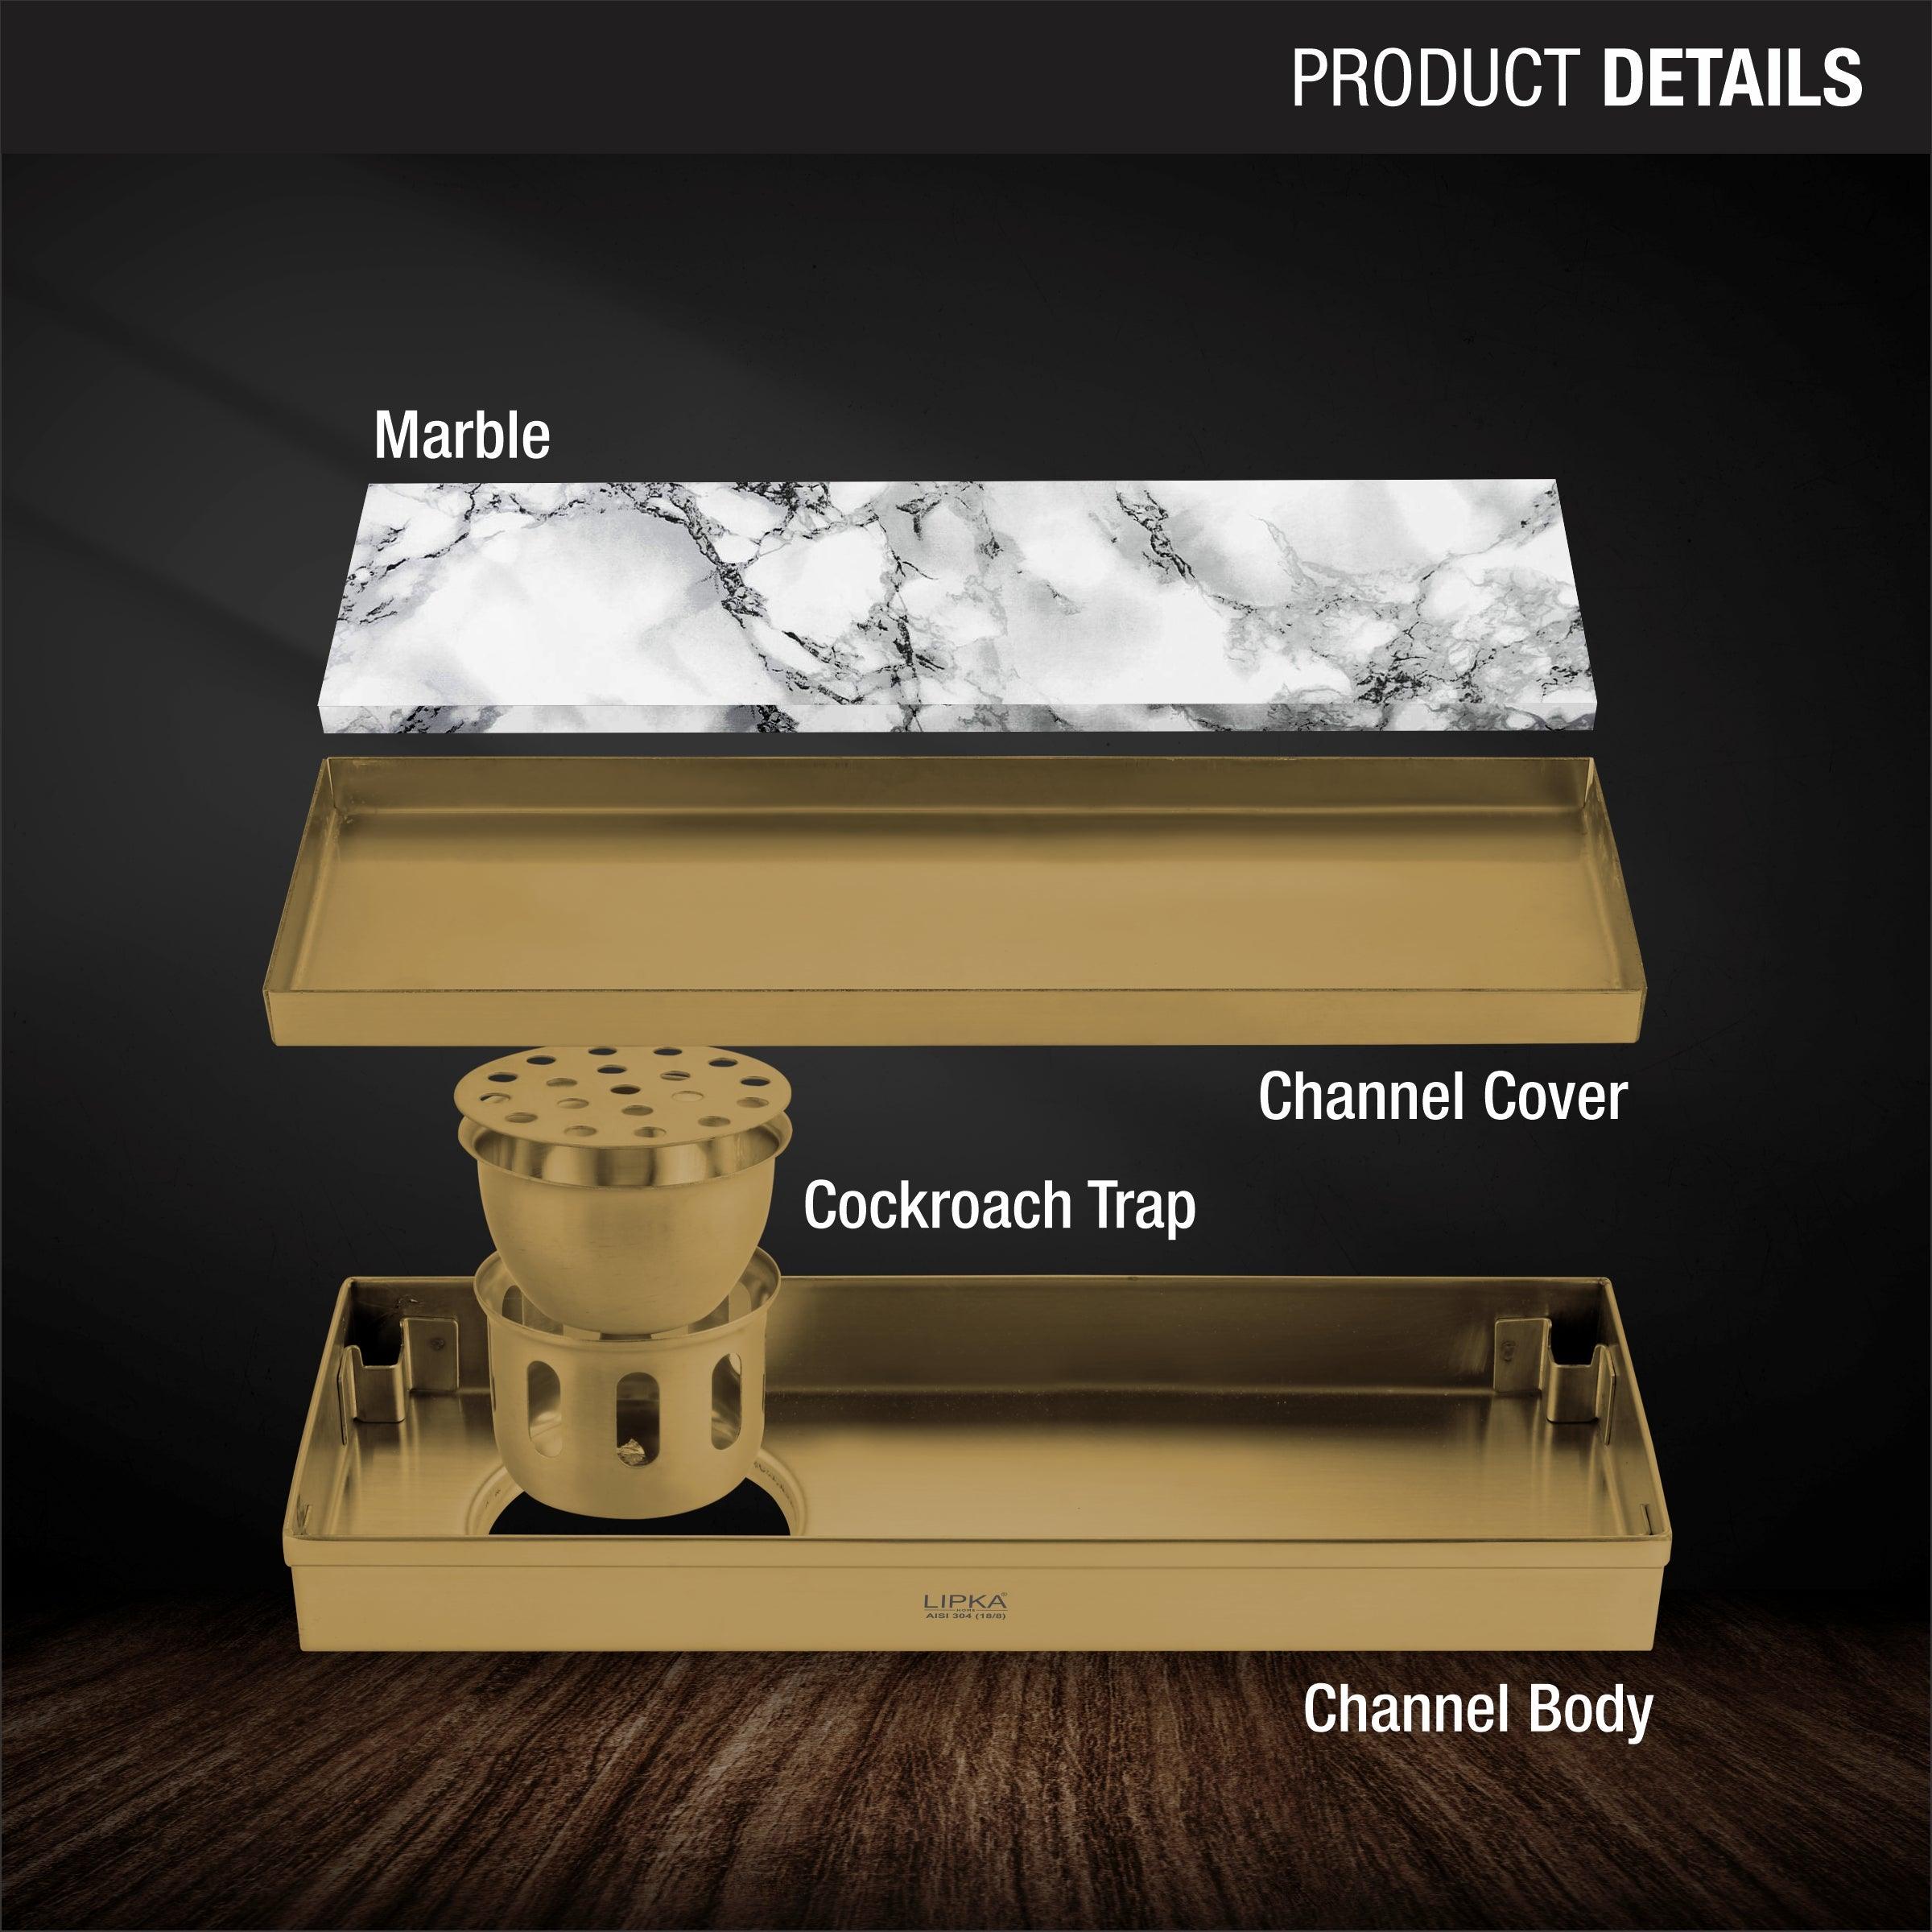 Marble Insert Shower Drain Channel - Yellow Gold (12 x 4 Inches) product details